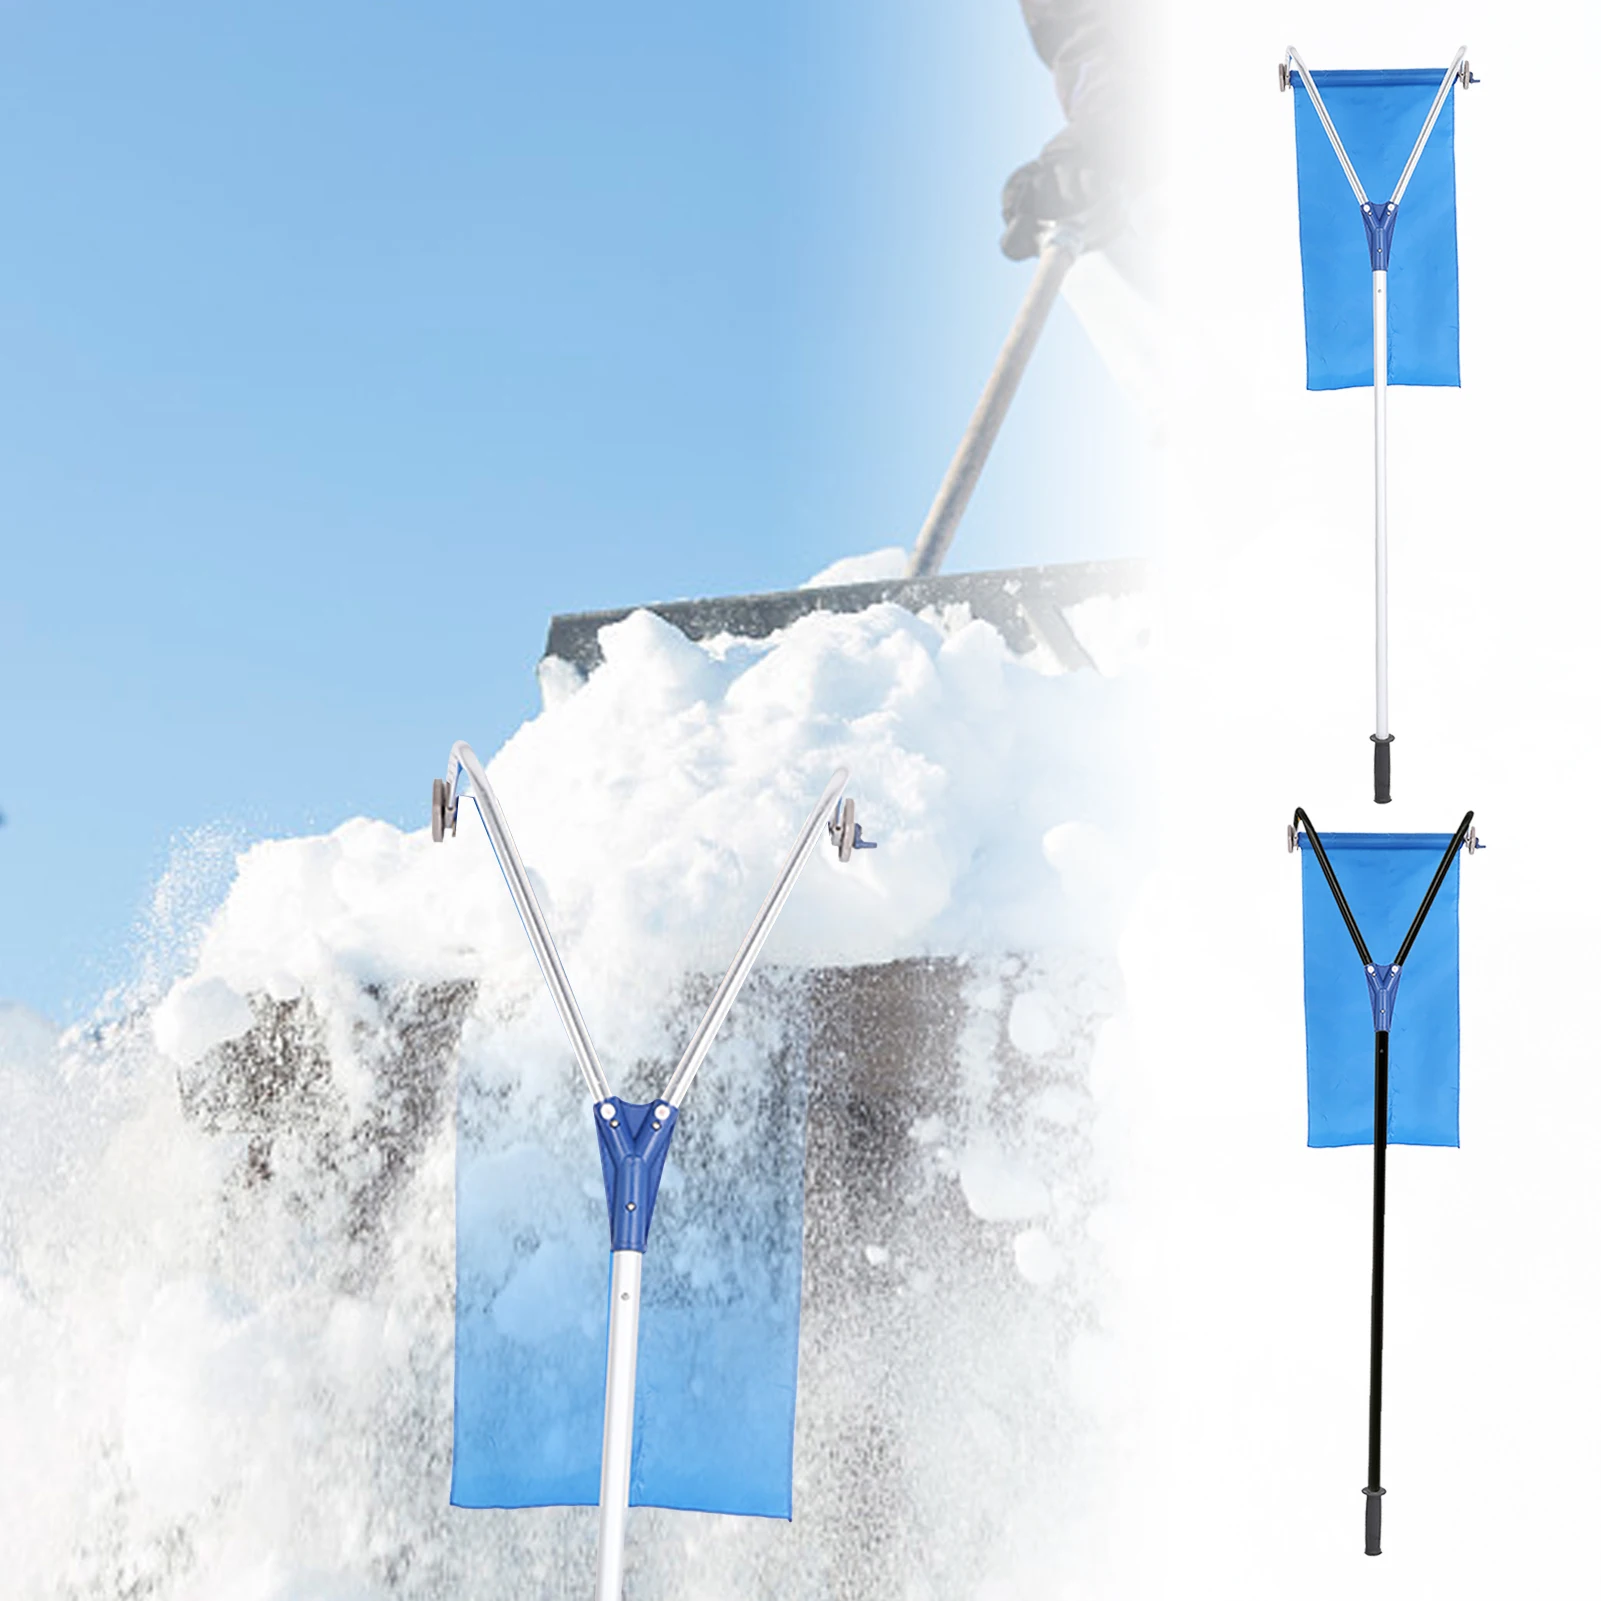 193-650cm Roof Snow Rake Telescopic Skid-proof Rod Snows Removal System Extendable Handle Adjustable Length Cleaning Tool